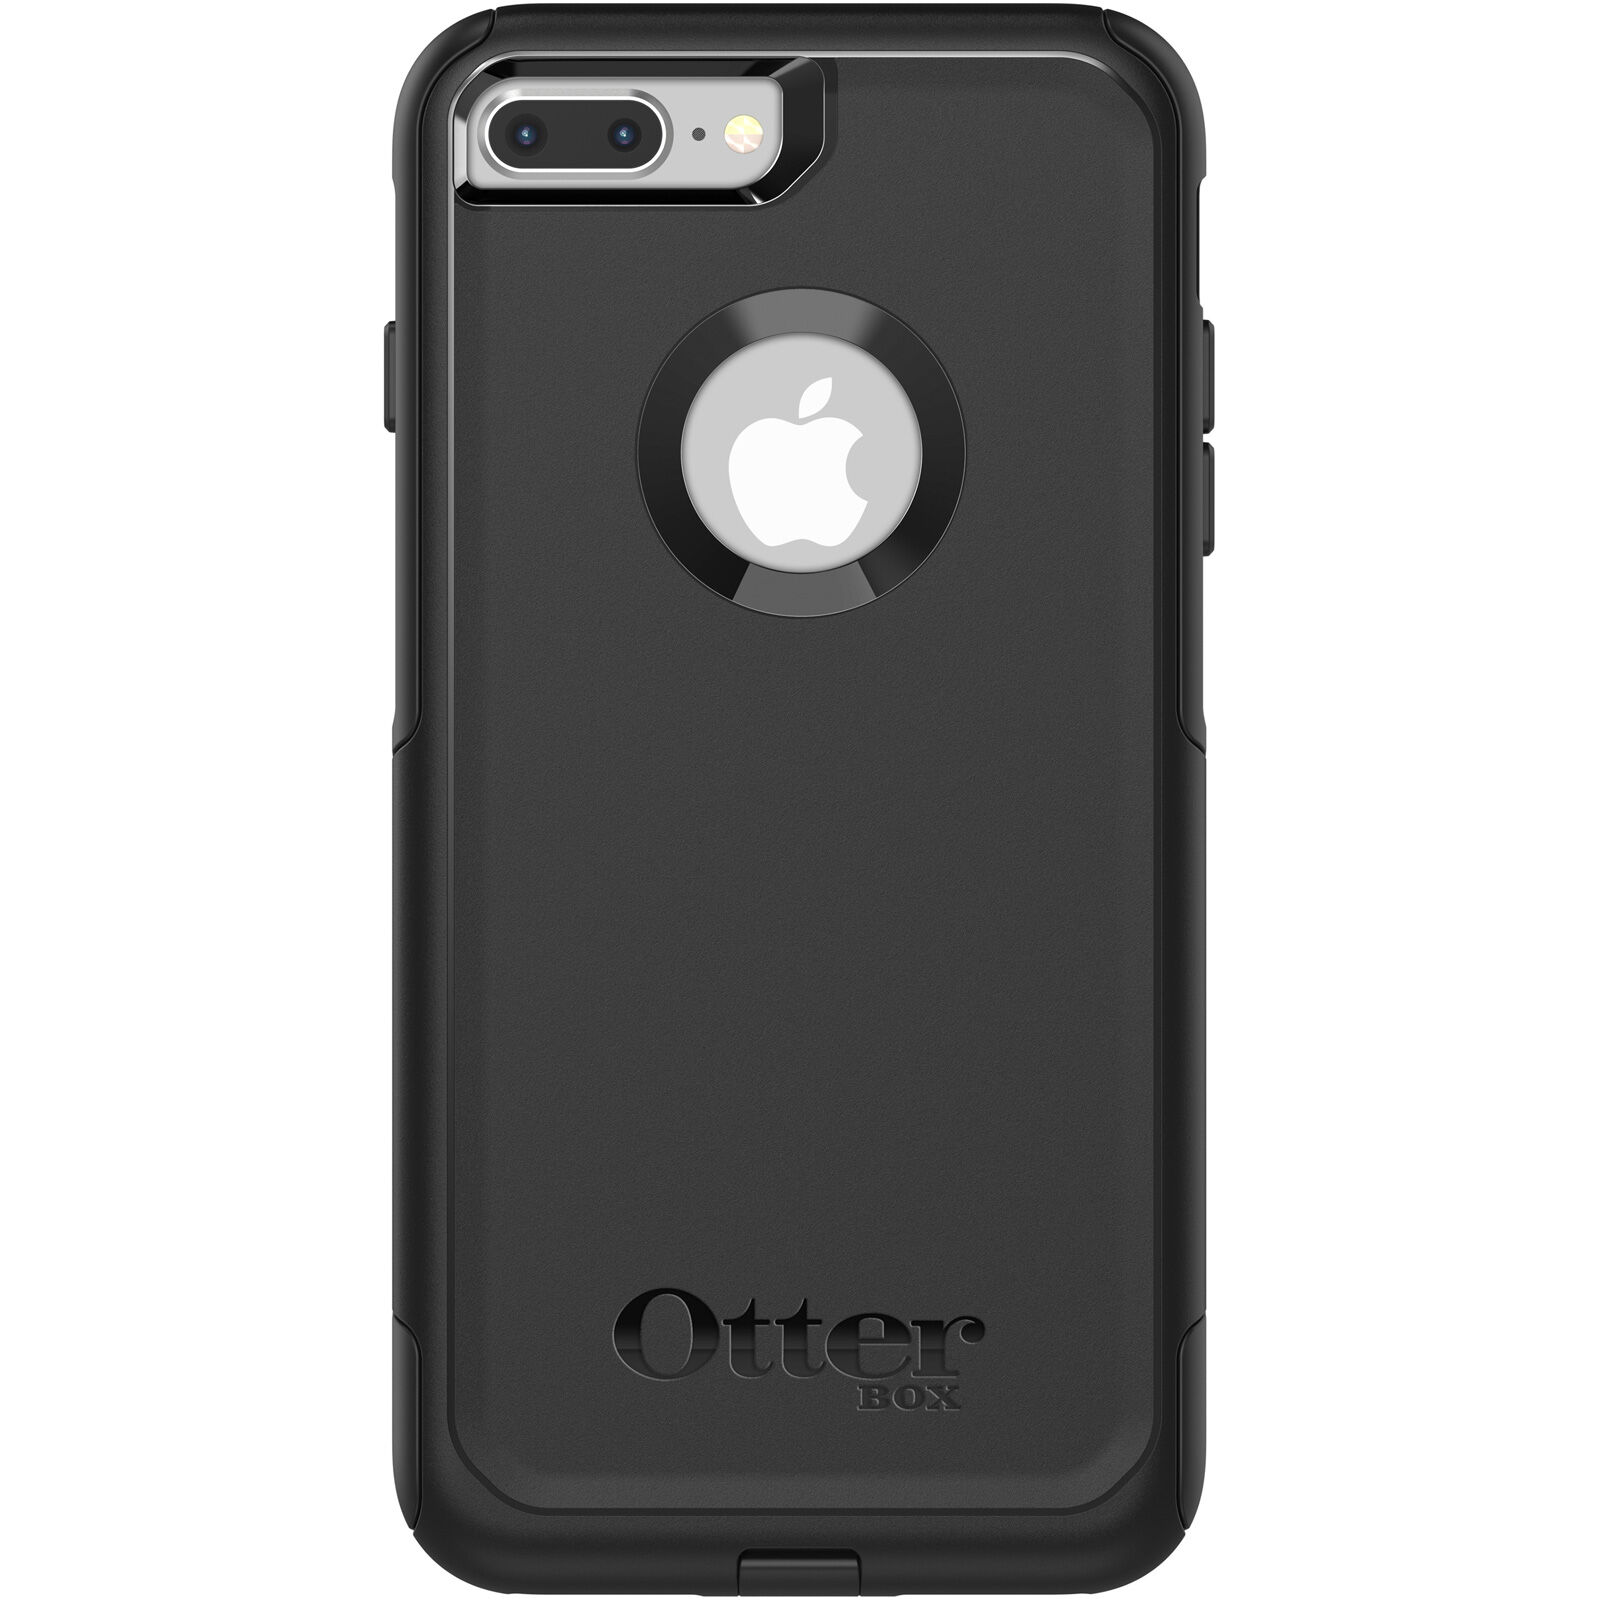 iPhone 8 Plus & iPhone 7 Plus Cases & Covers from OtterBox